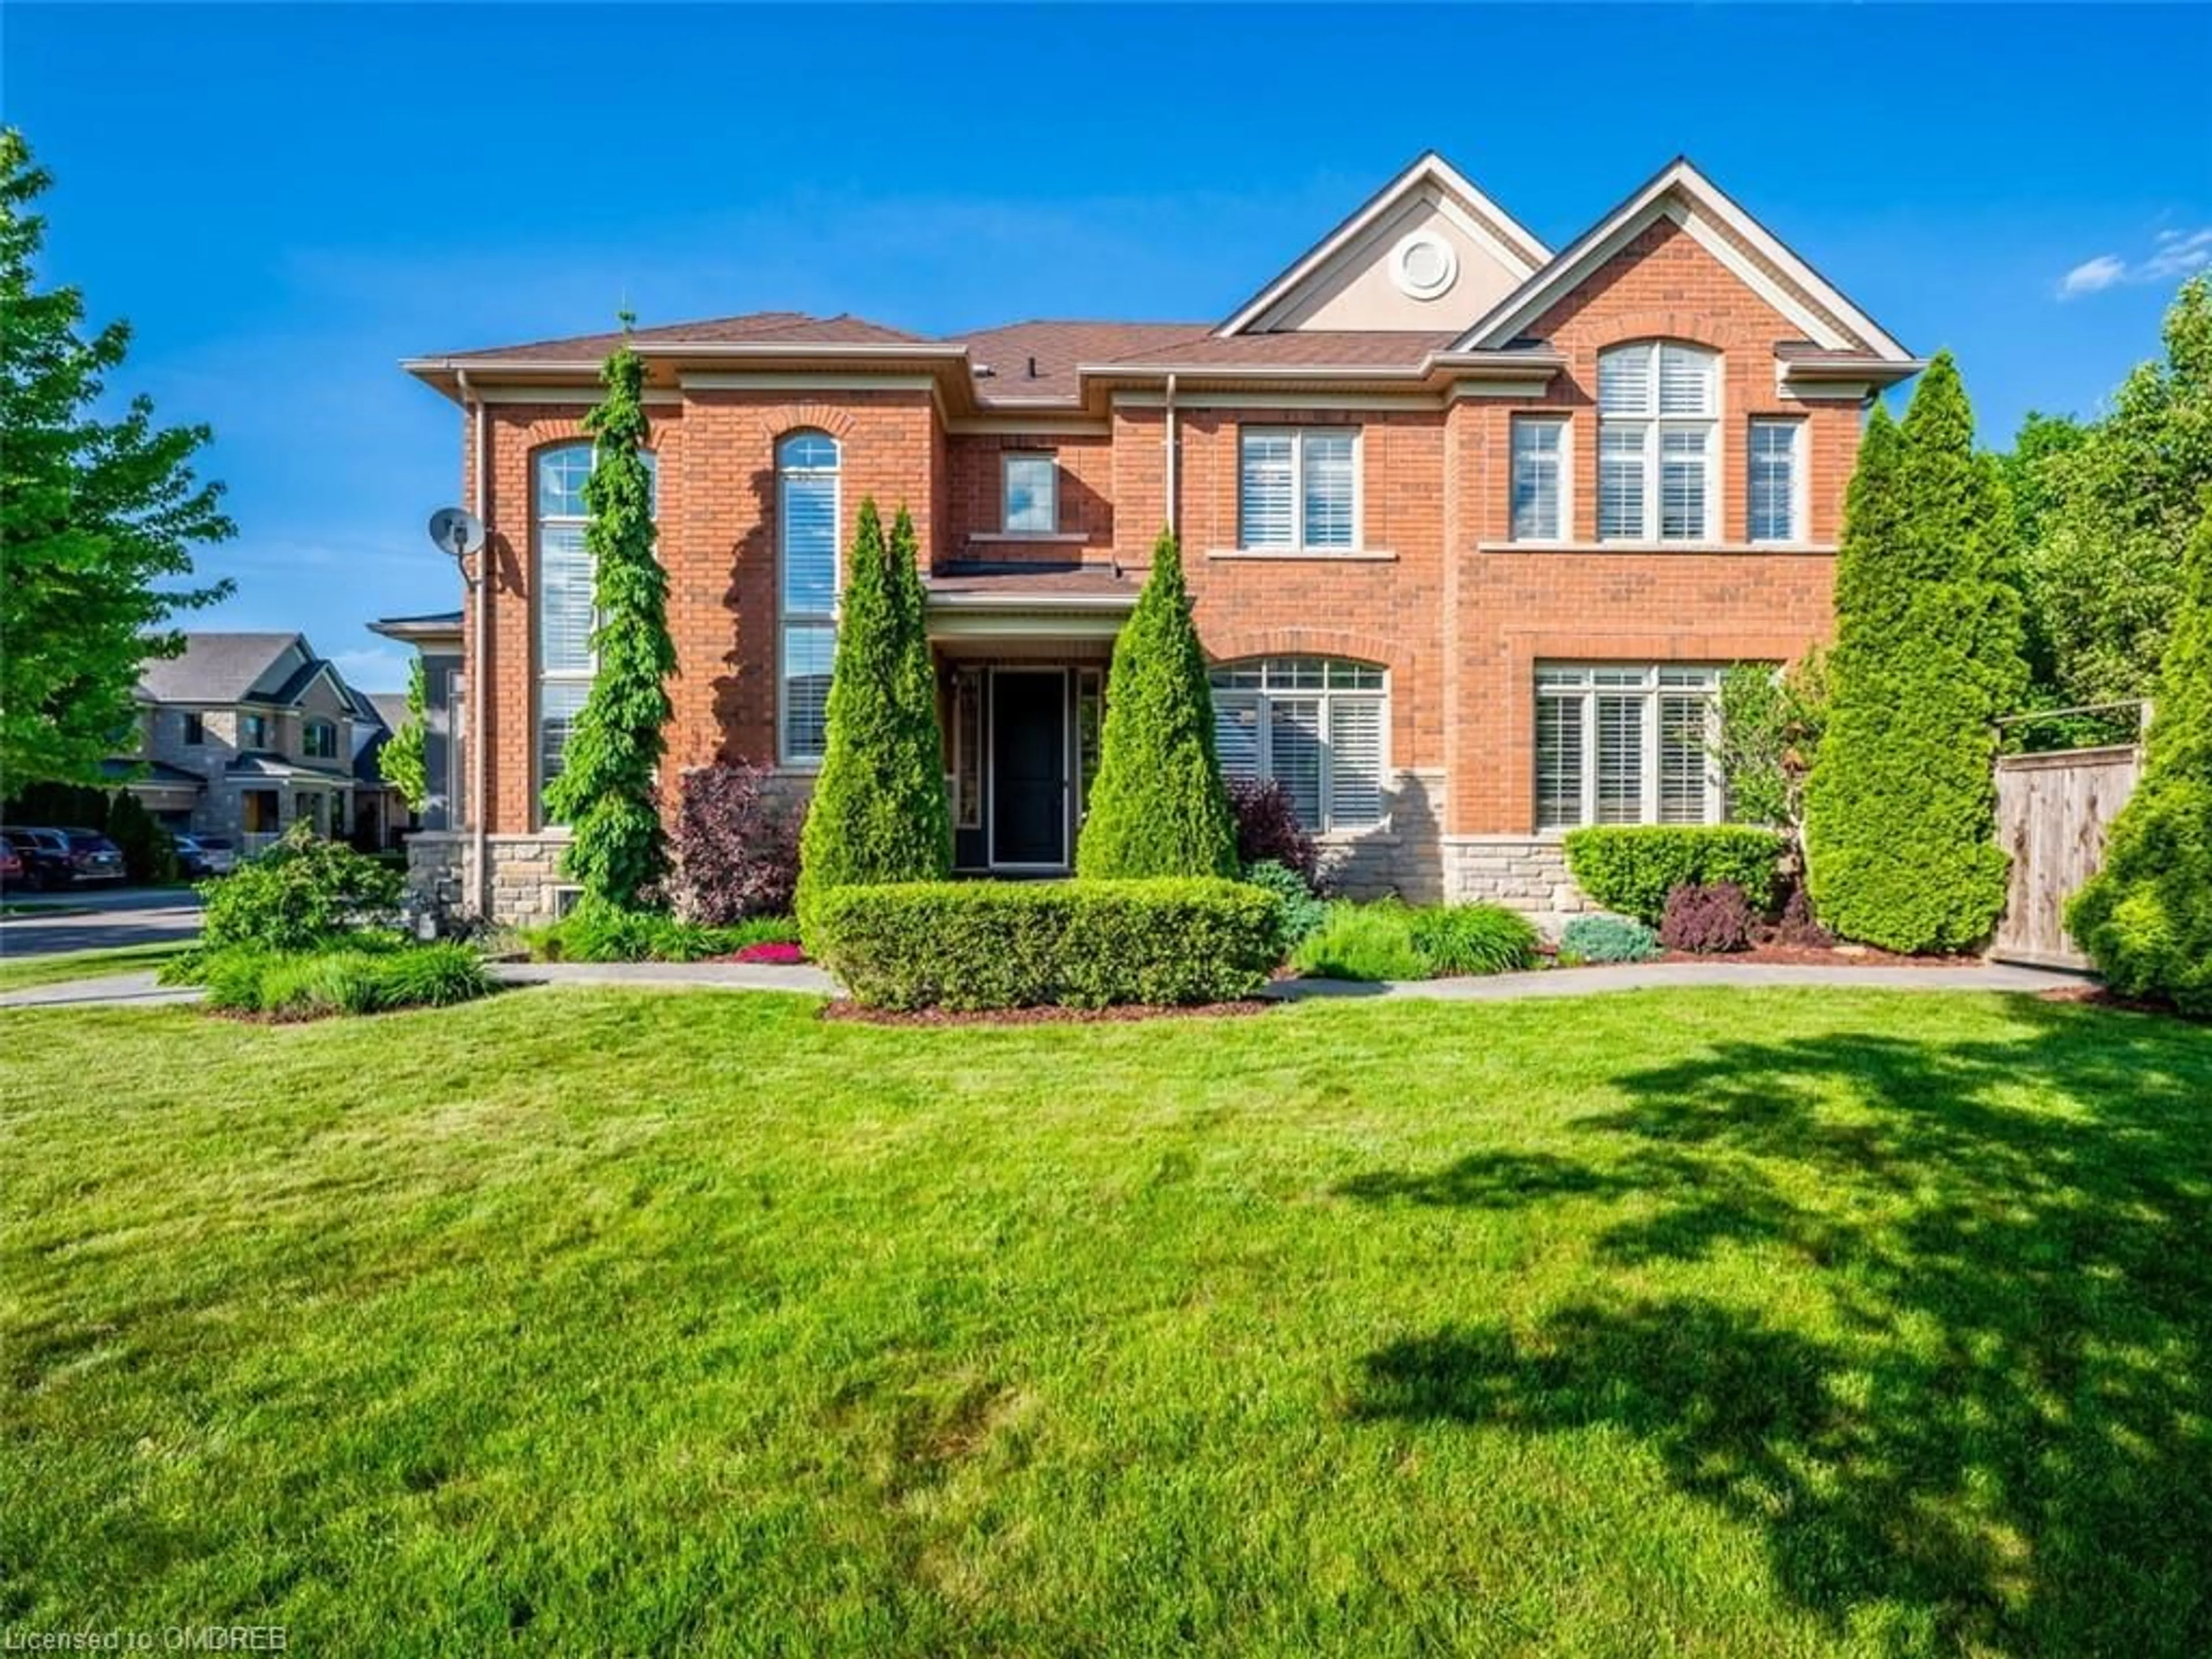 Home with brick exterior material for 254 Melanson Hts, Milton Ontario L9T 0S6